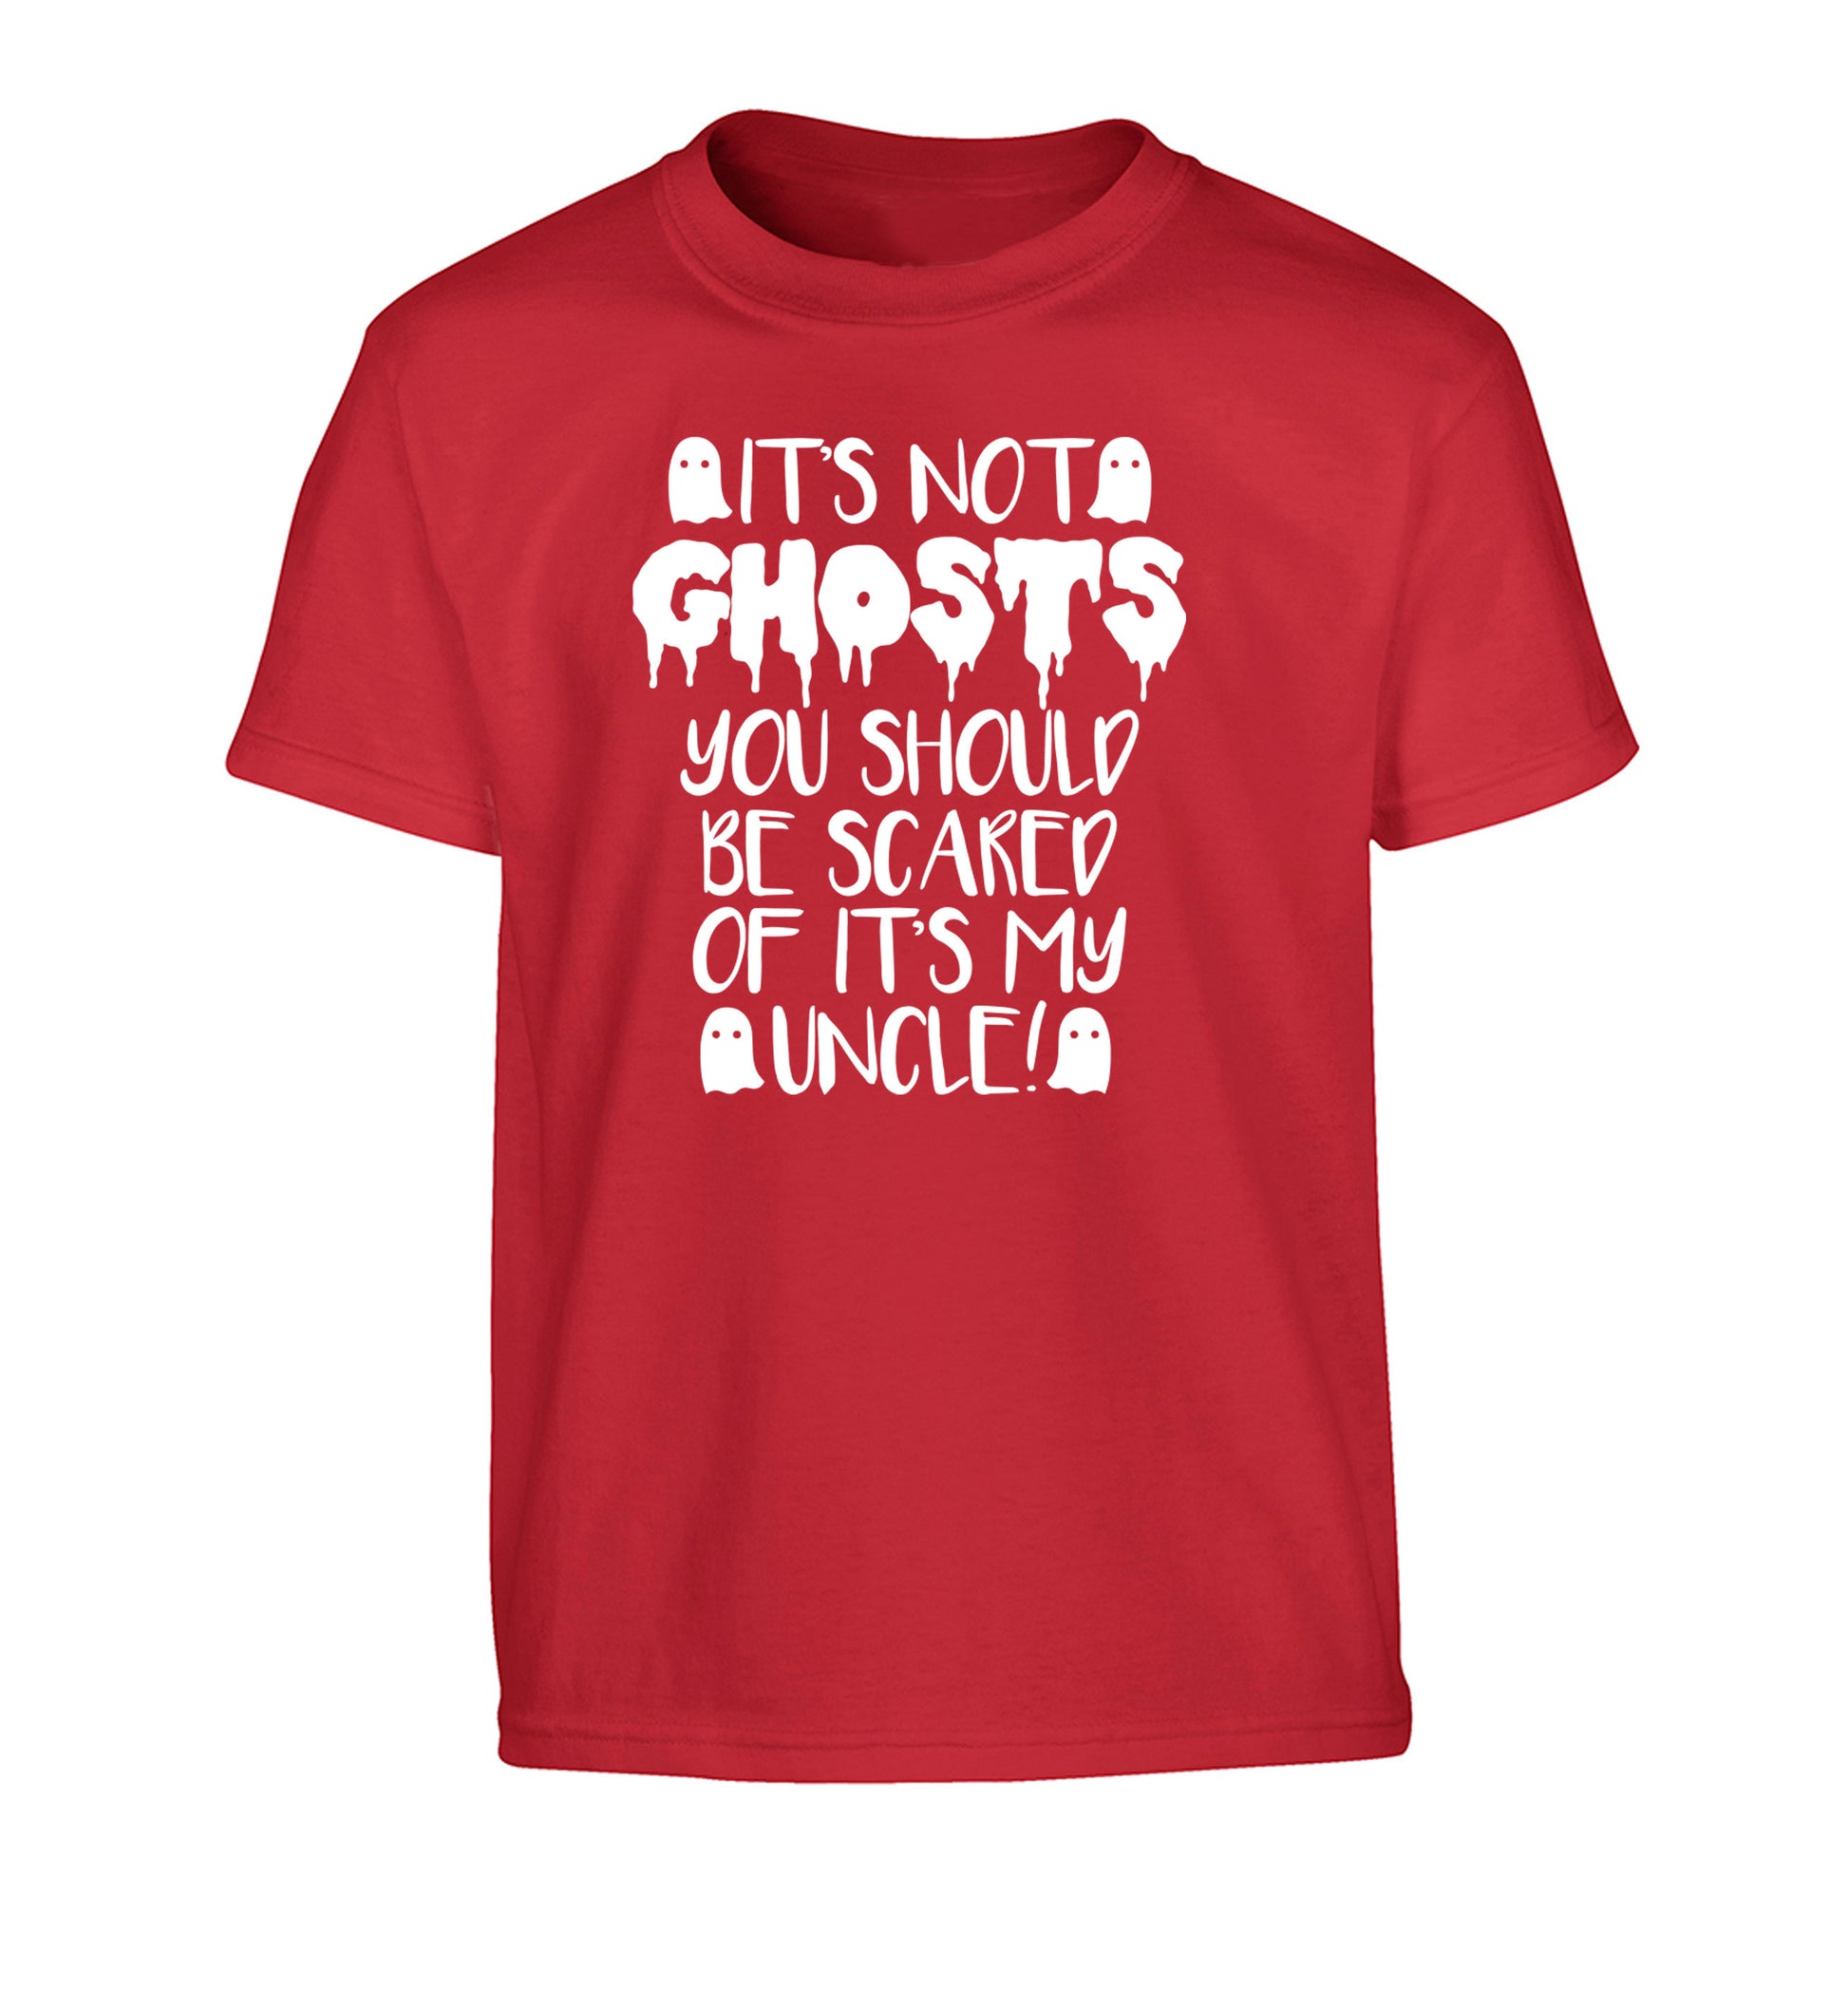 It's not ghosts you should be scared of it's my uncle! Children's red Tshirt 12-14 Years